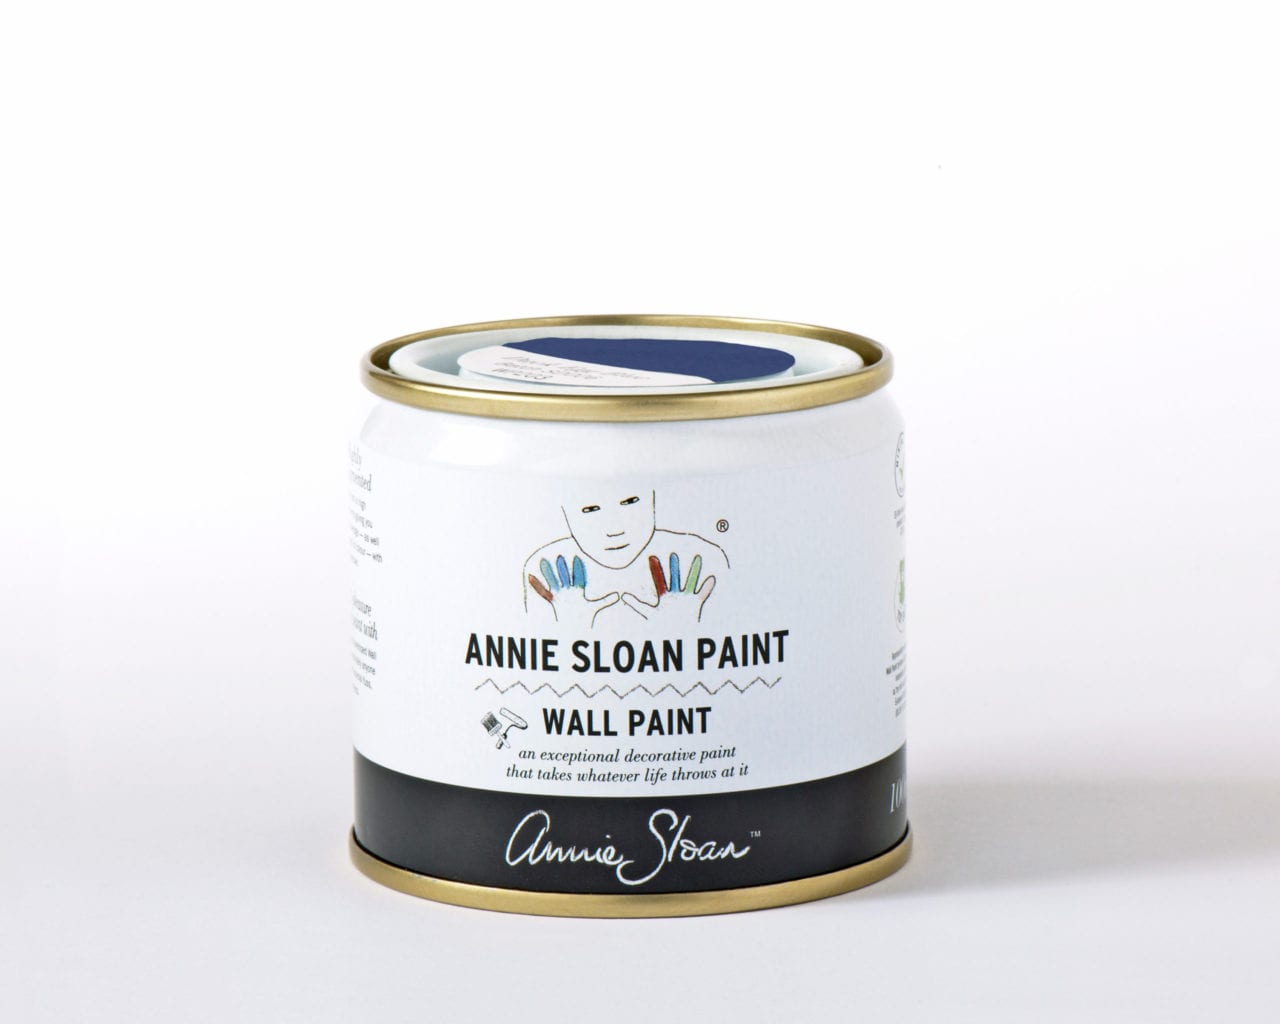 1641471074Napoleonic-Blue-Annie-Sloan-Wall-Paint-100-ml-tin-scaled-1.jpg